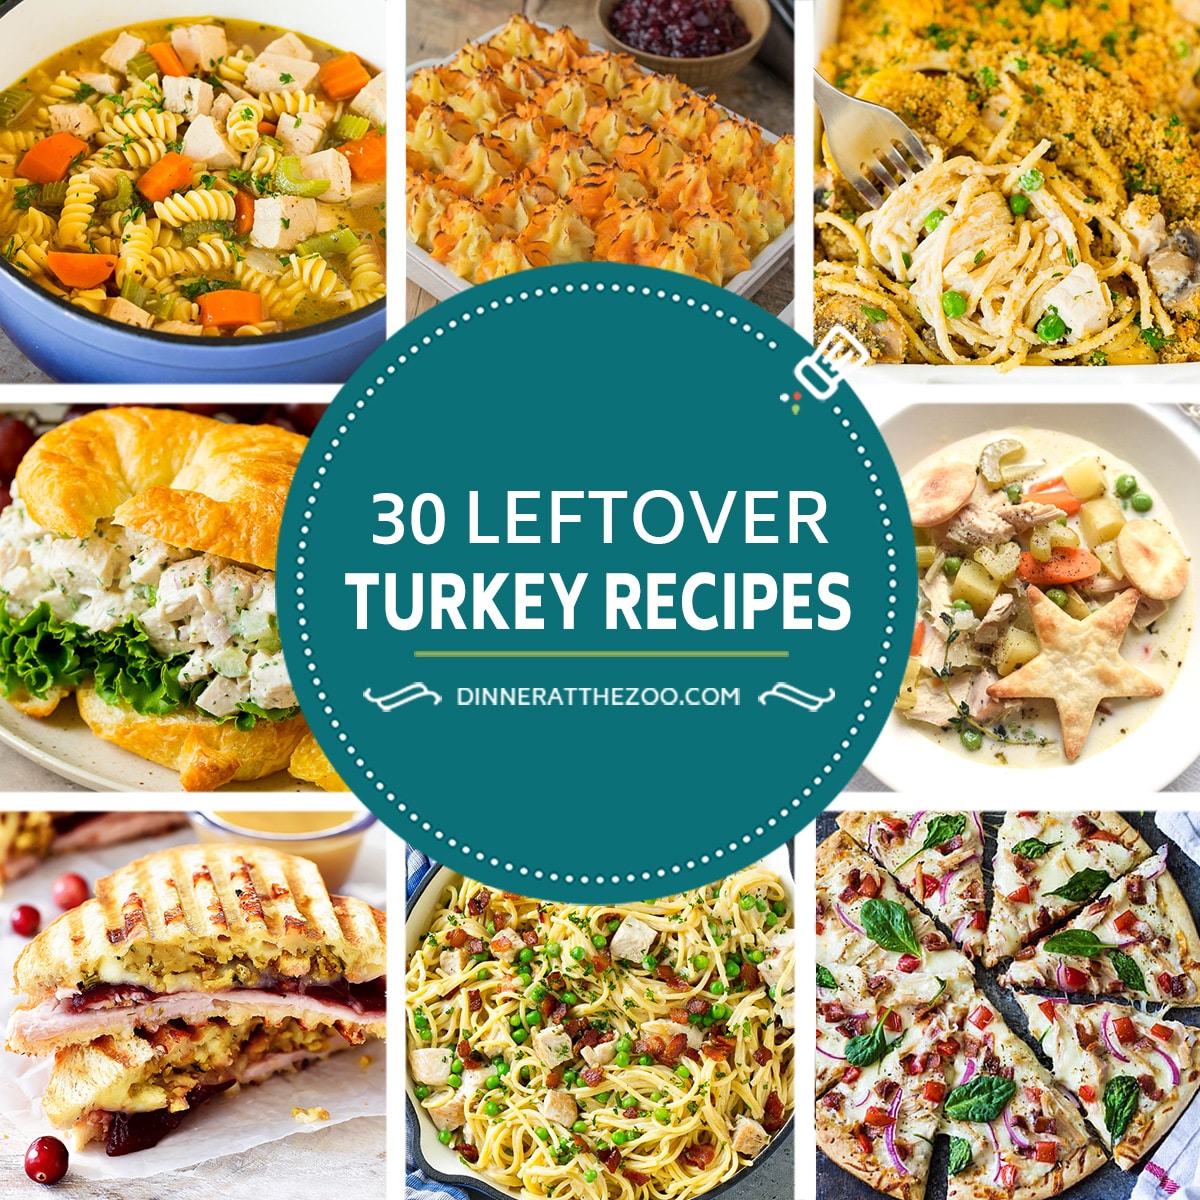 A collage of images of leftover turkey recipes like turkey salad, turkey noodle soup and turkey bacon ranch pizza.